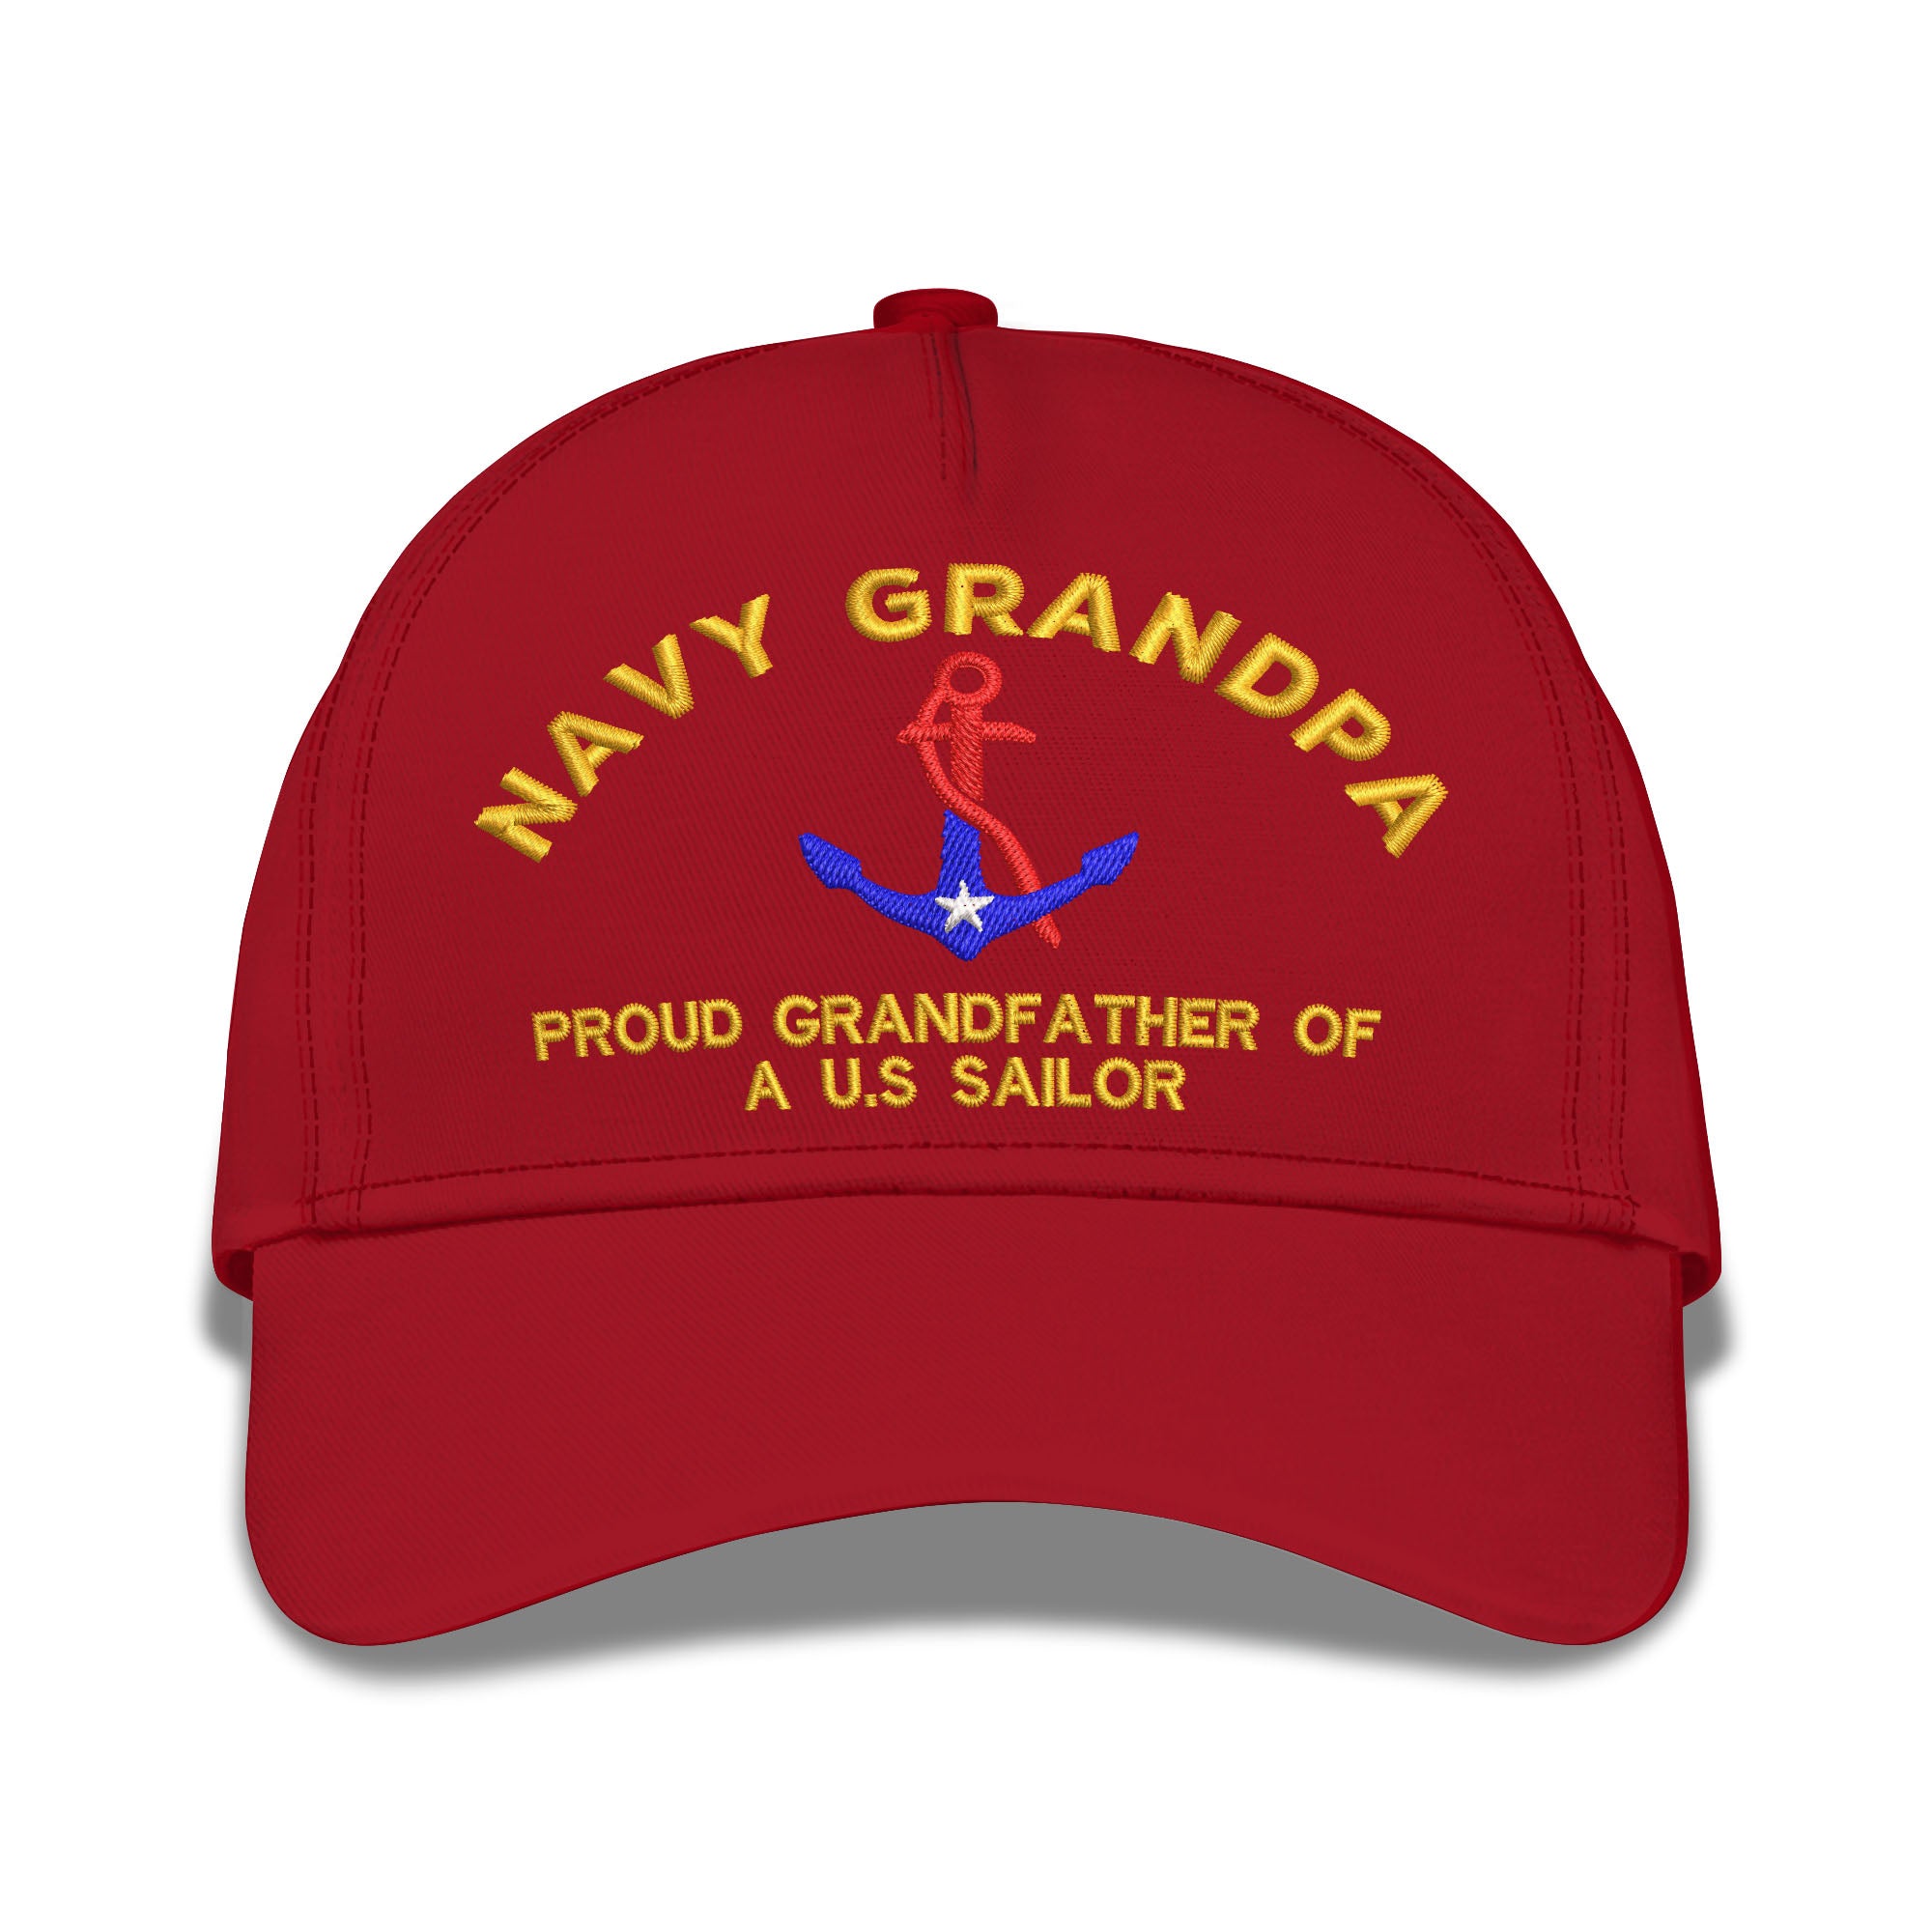 Navy Grandpa Proud Grandfaather Ther Of A U.S Sailor Embroidered Baseball Caps